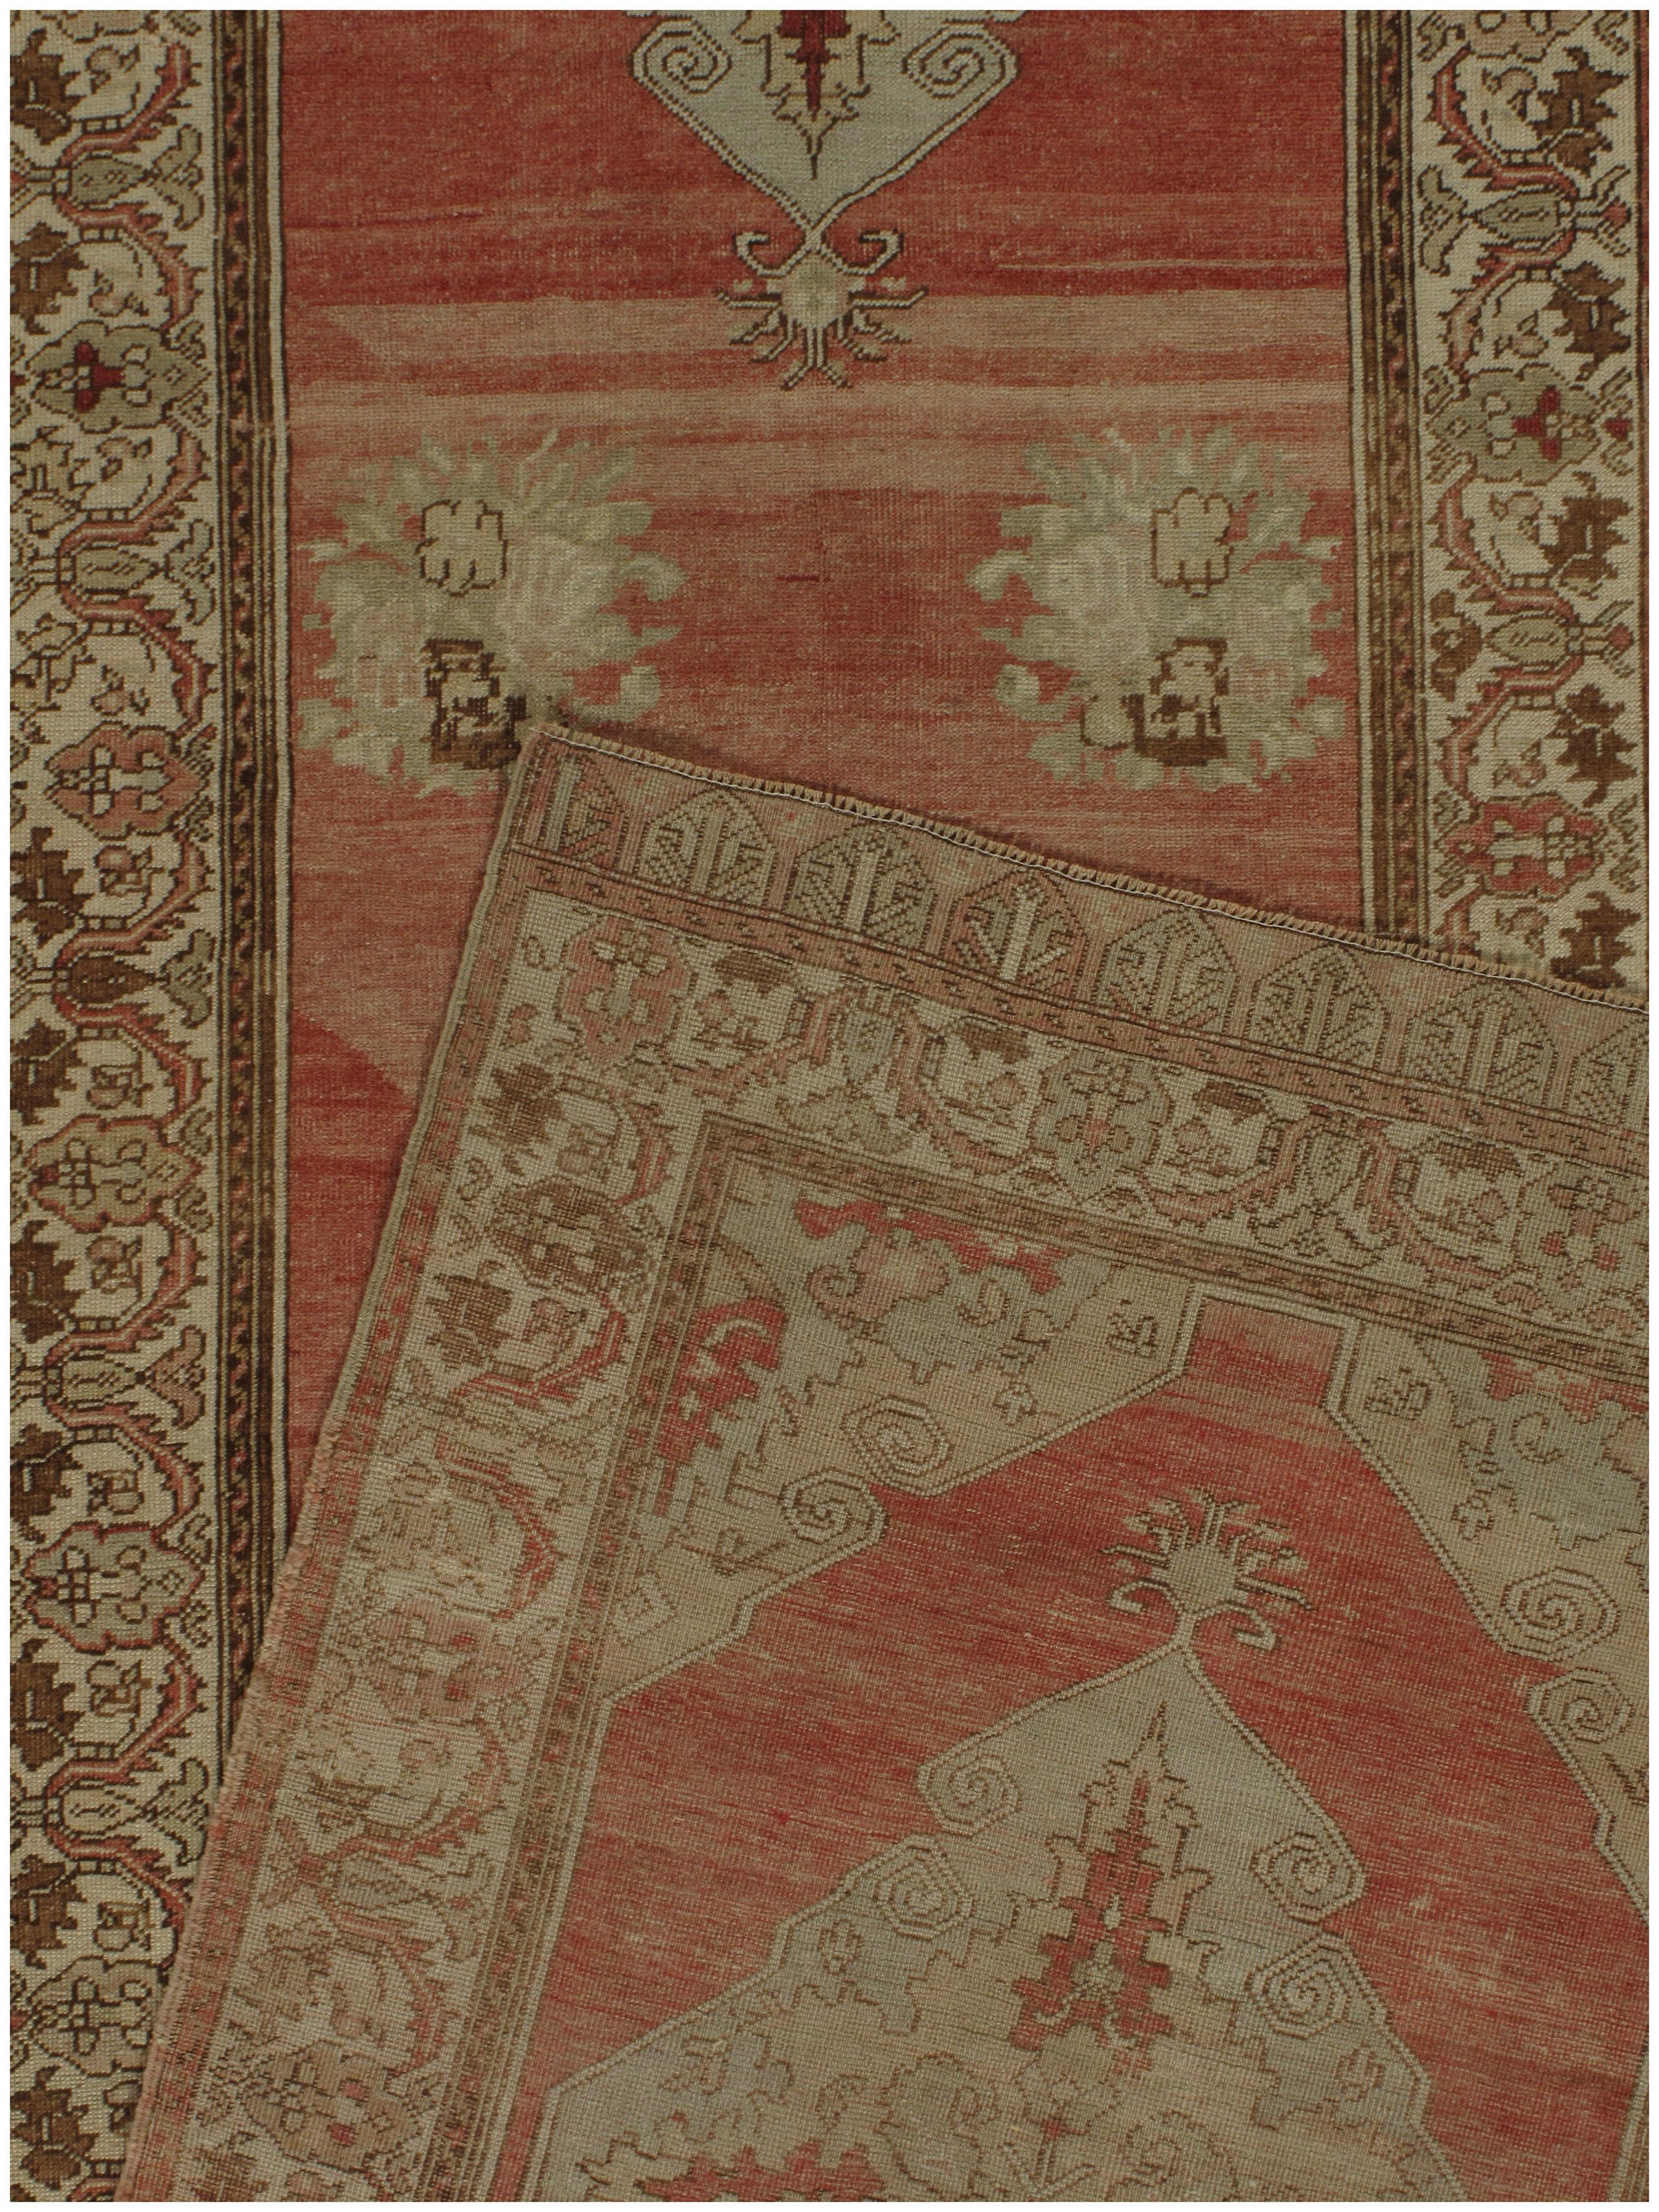 Vintage Turkish Oushak rug runner, 3'5' x 12'9'. Oushak's are known for their soft palettes combined with eccentric drawing. Oushak in western Turkey has the longest continuous rug weaving history, stretching back at least to the mid-fifteenth